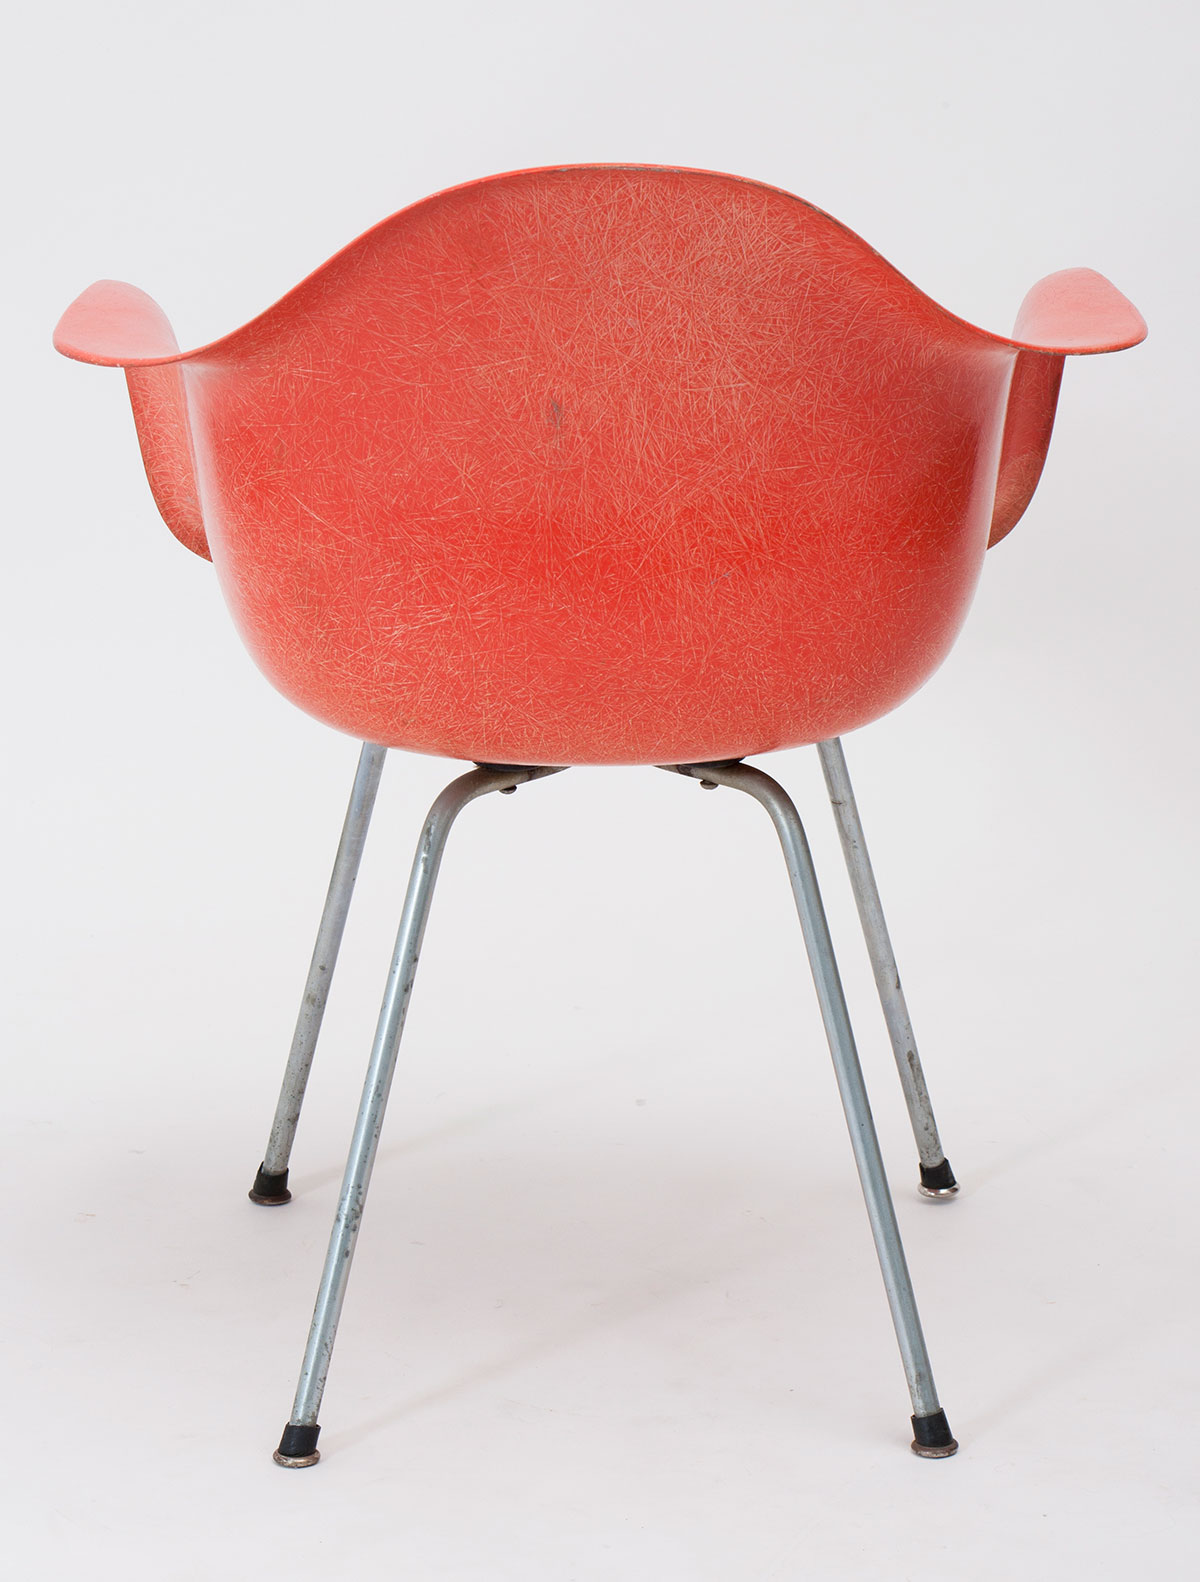 1703 charles eames shell chair patrick parrish 0002